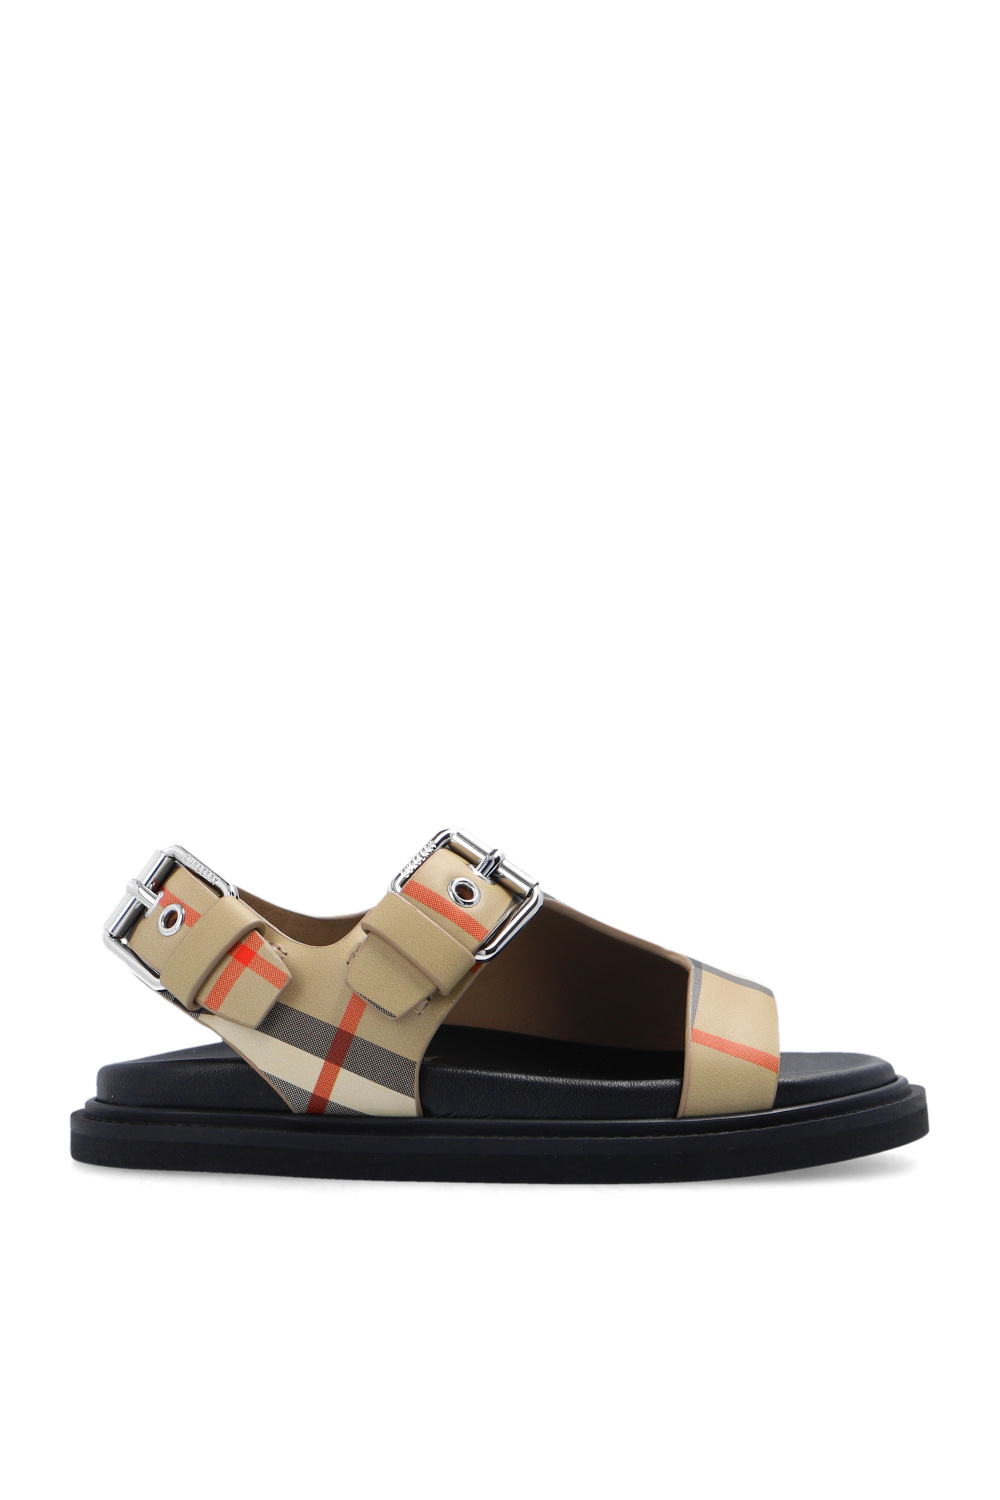 Burberry Kids Checked sandals